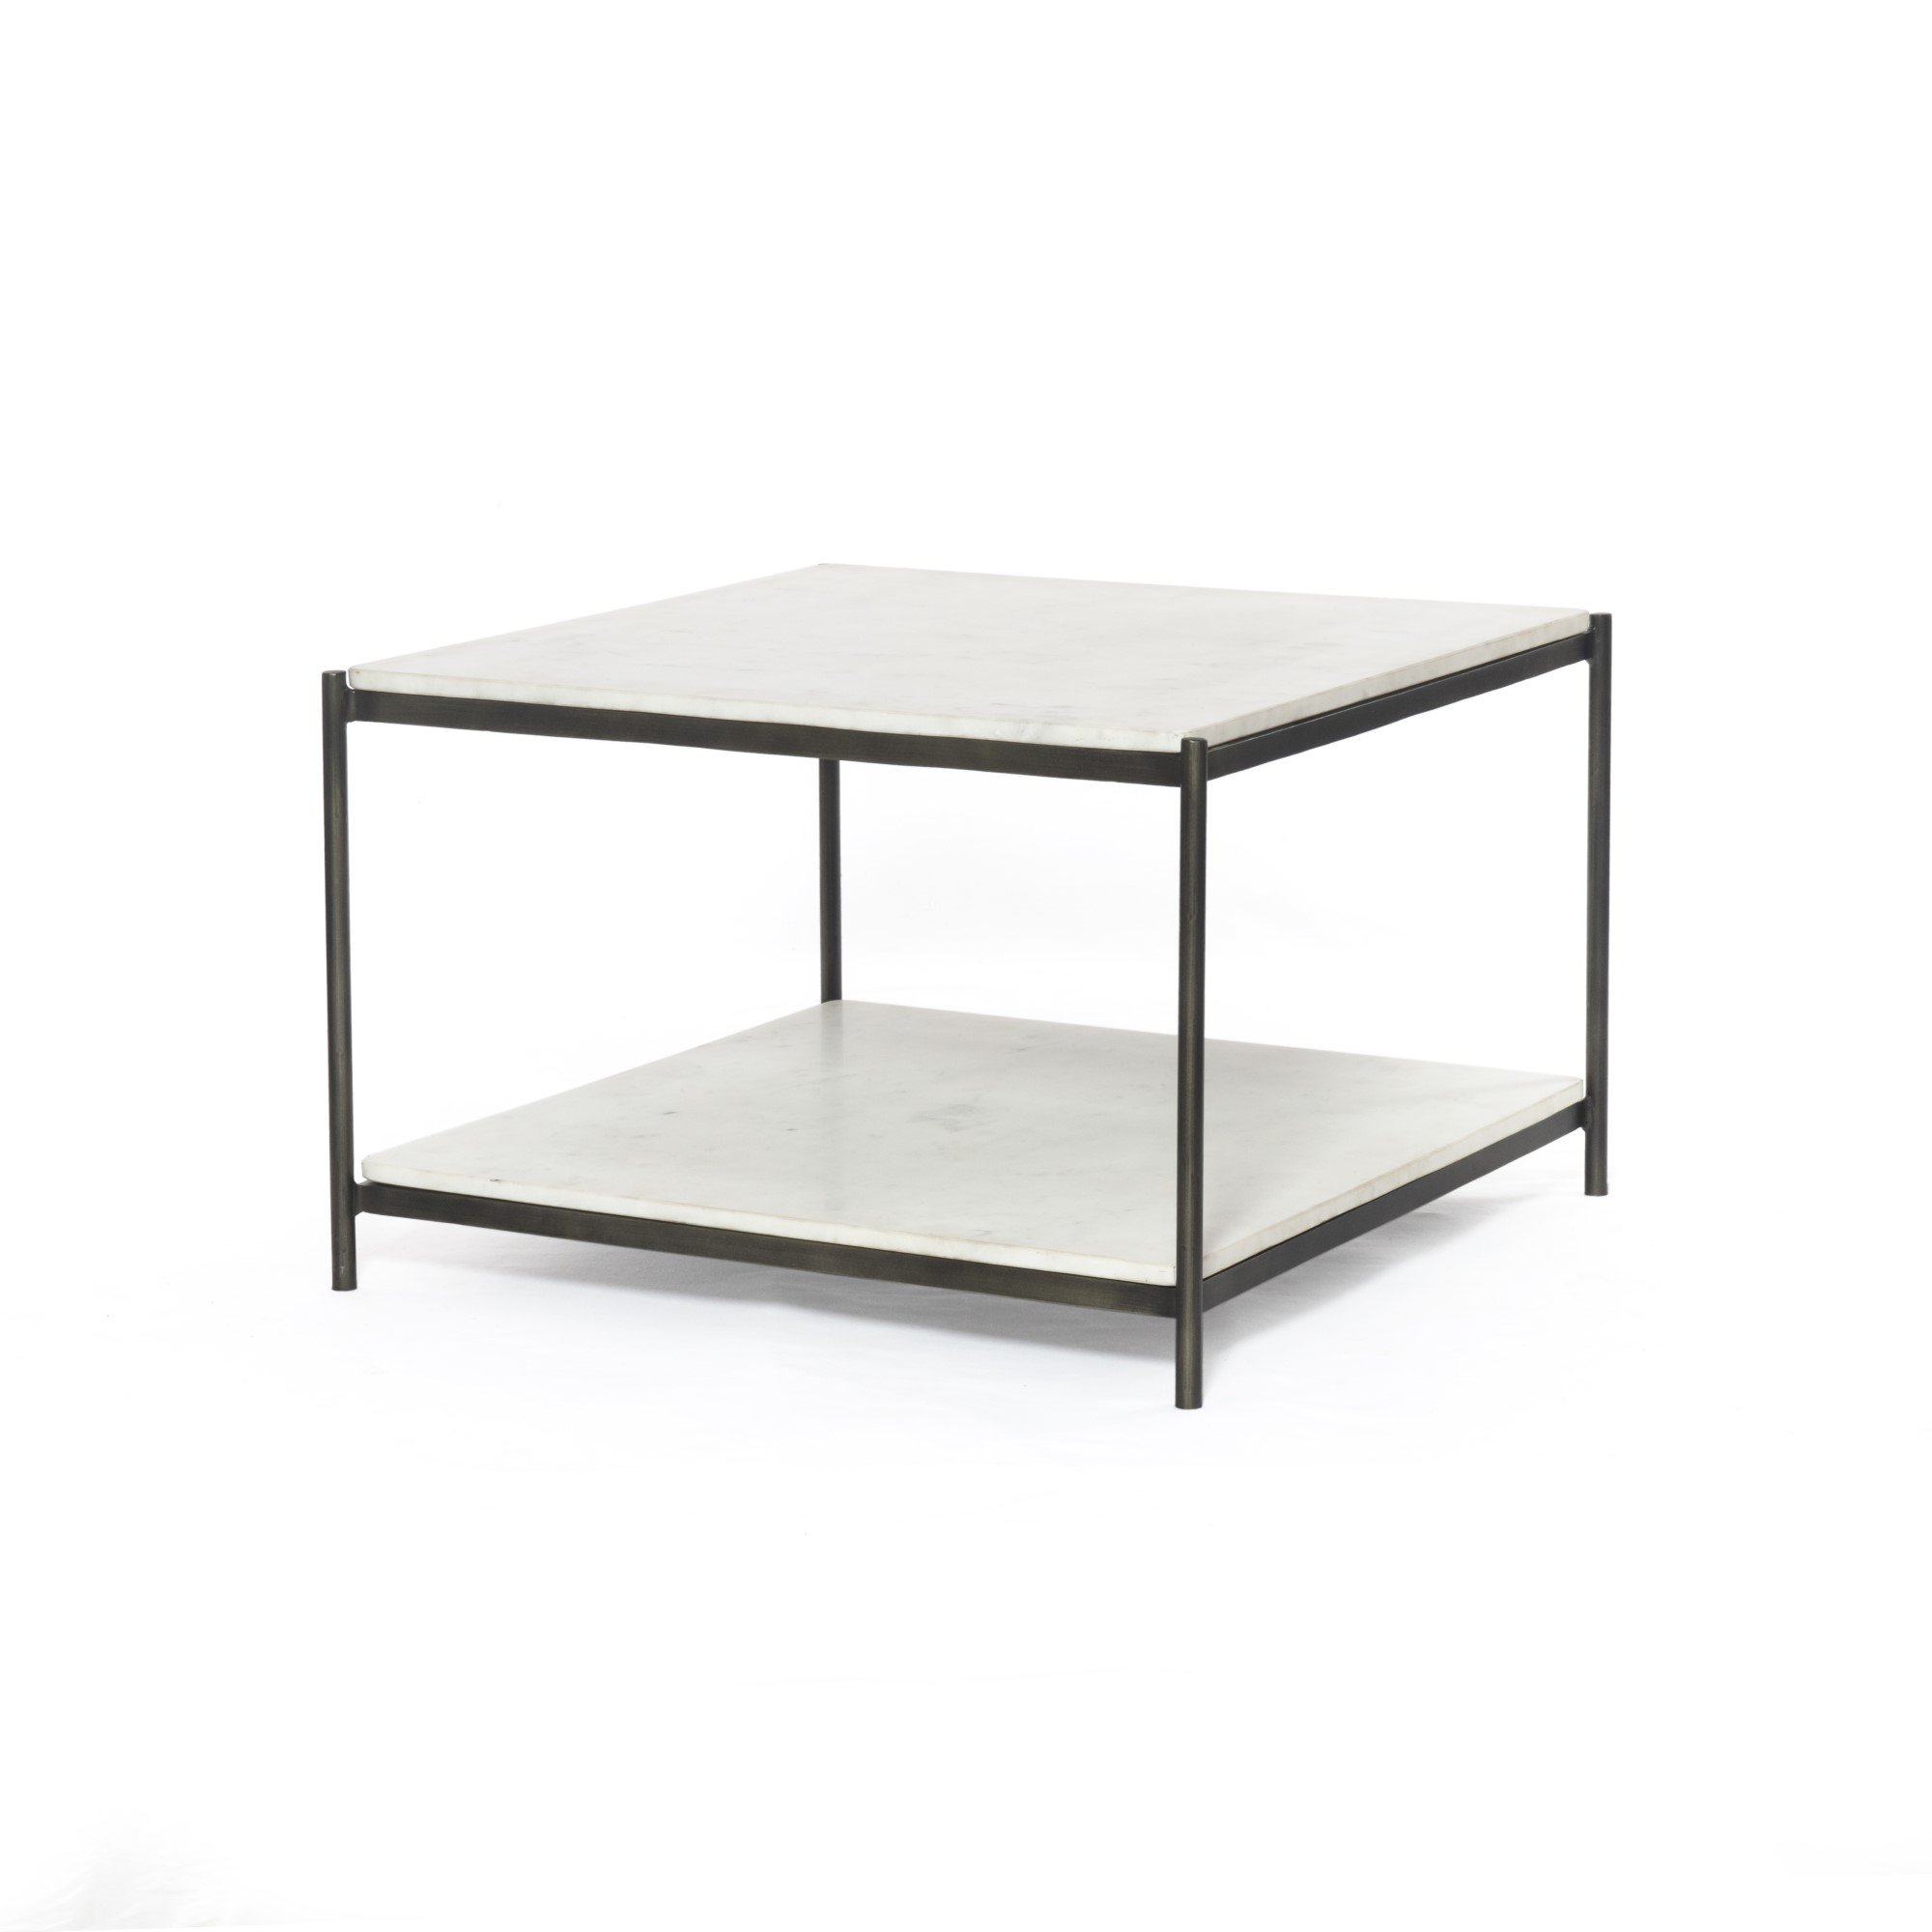 square hammered metal coffee table with marble top and lower shelf $649.00